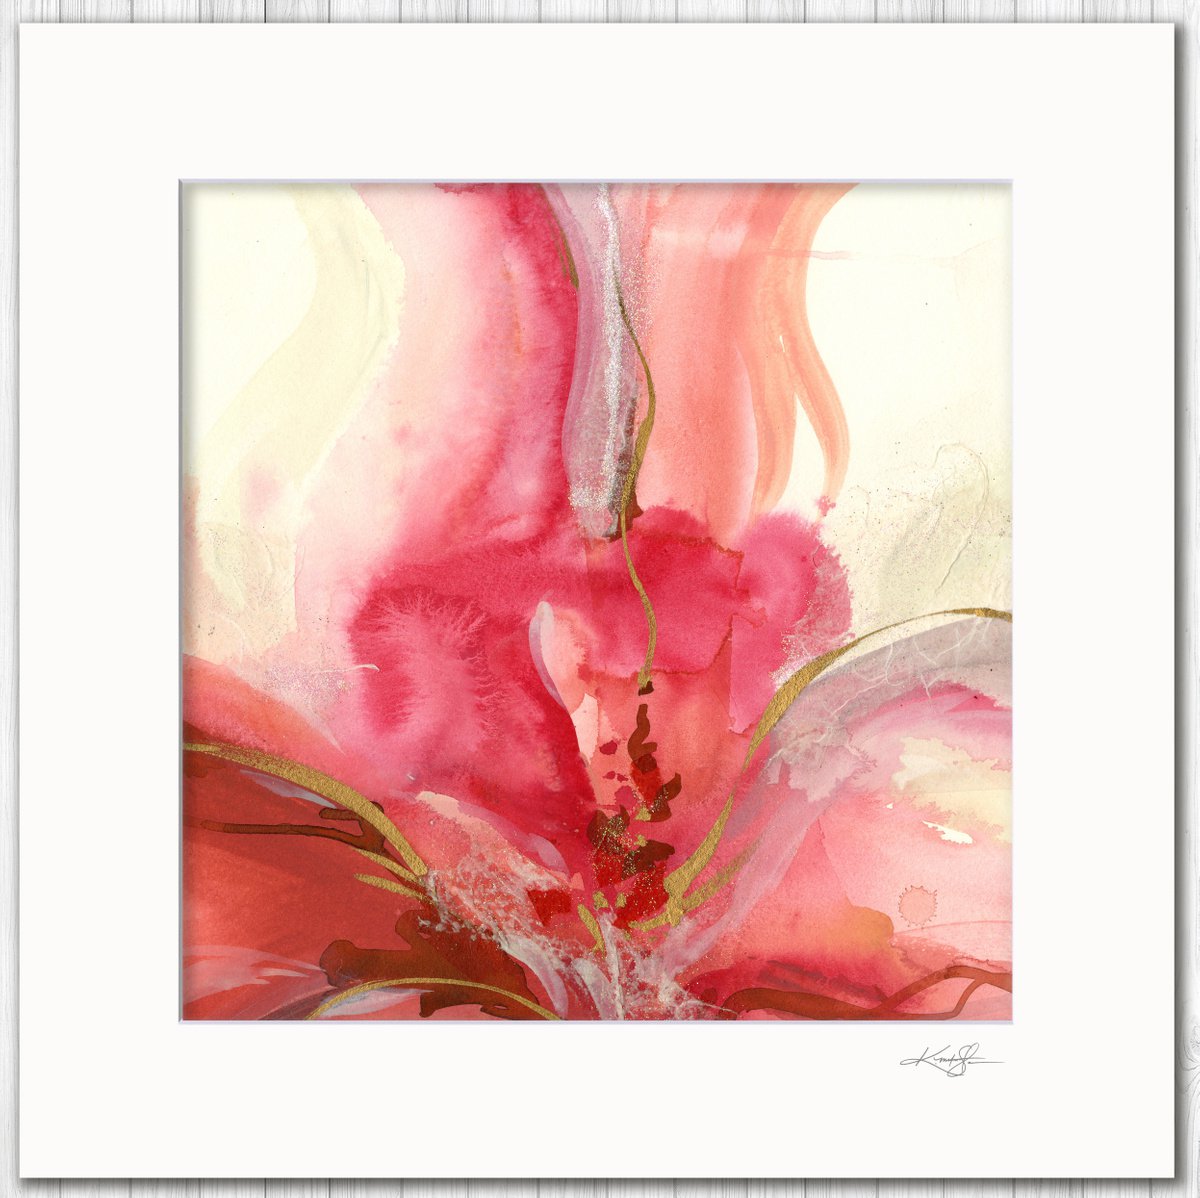 Soul’s Bloom 13 - Spiritual Abstract Floral Painting by Kathy Morton Stanion by Kathy Morton Stanion